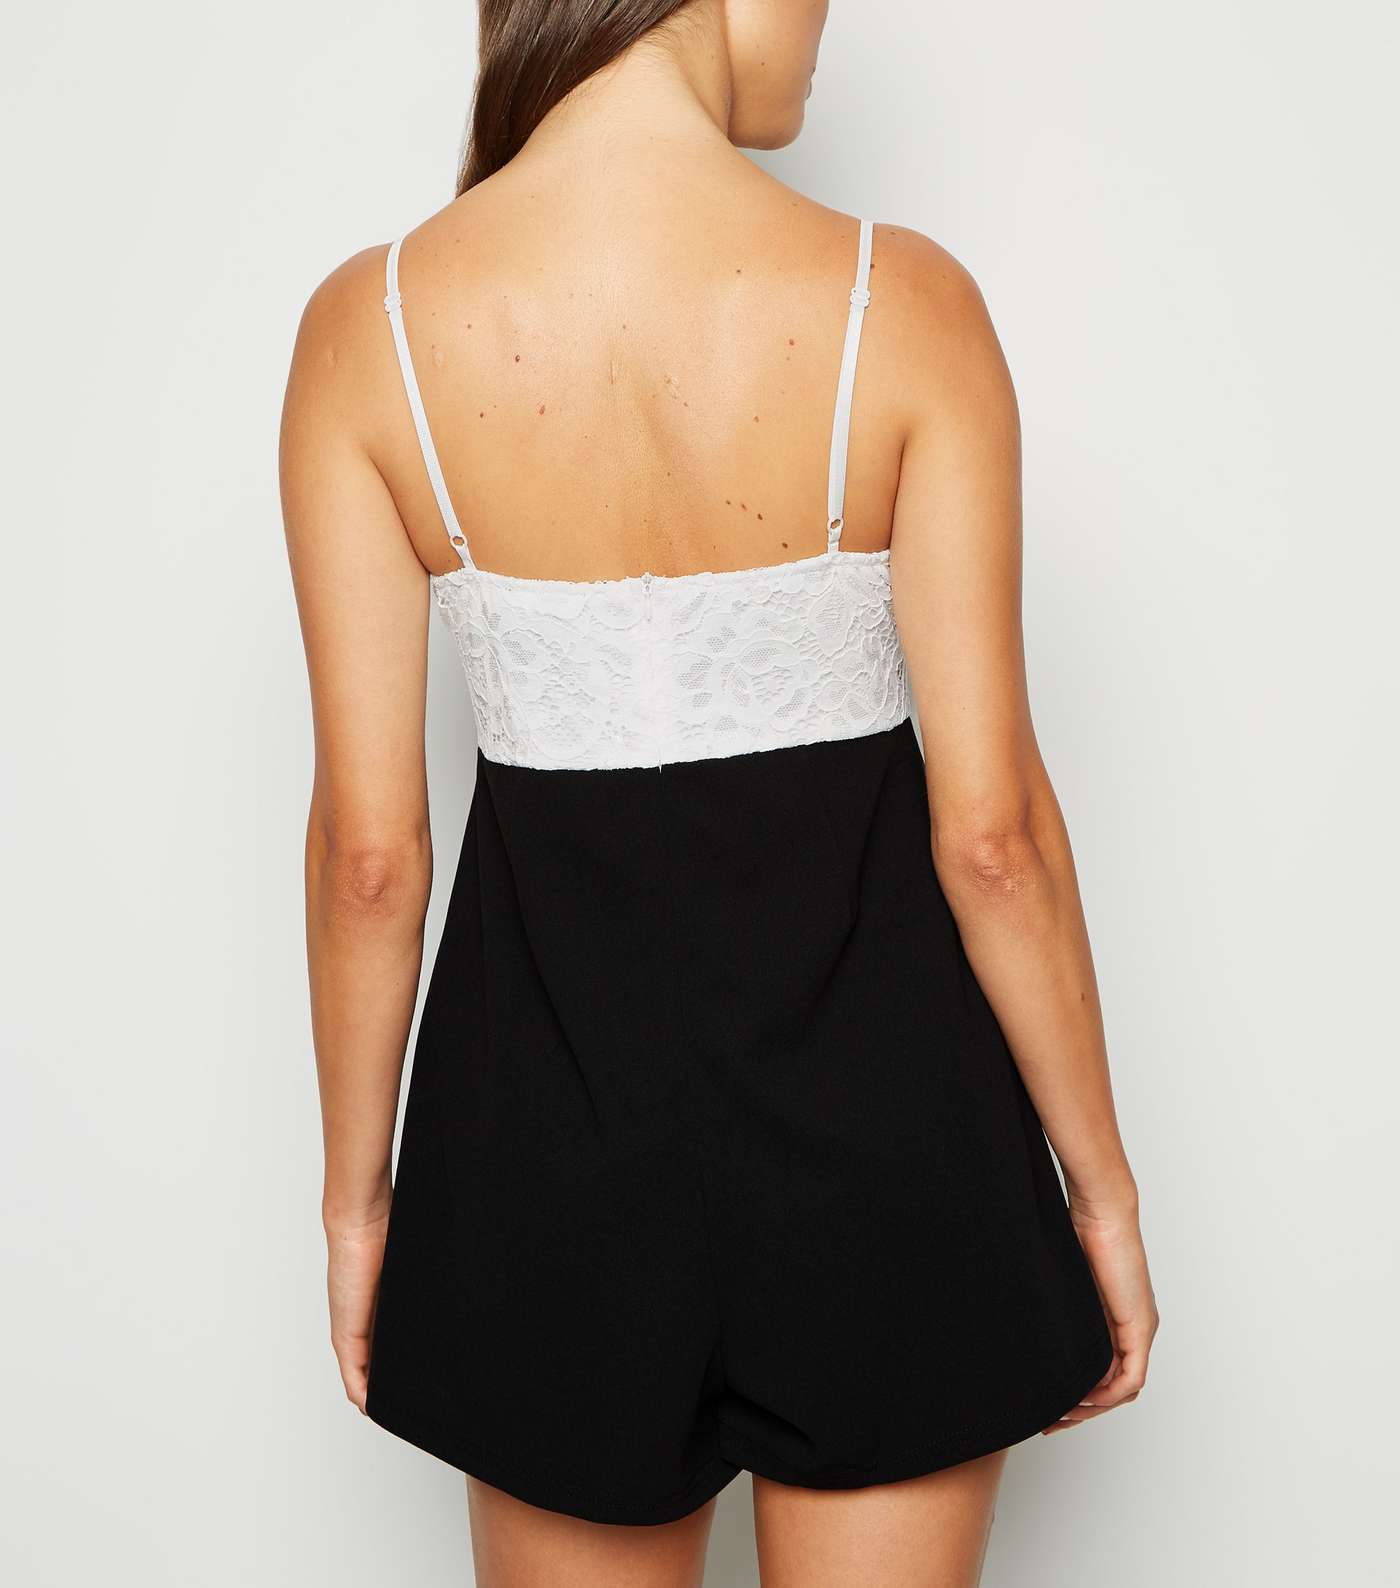 White and Black Lace Top Playsuit Image 5